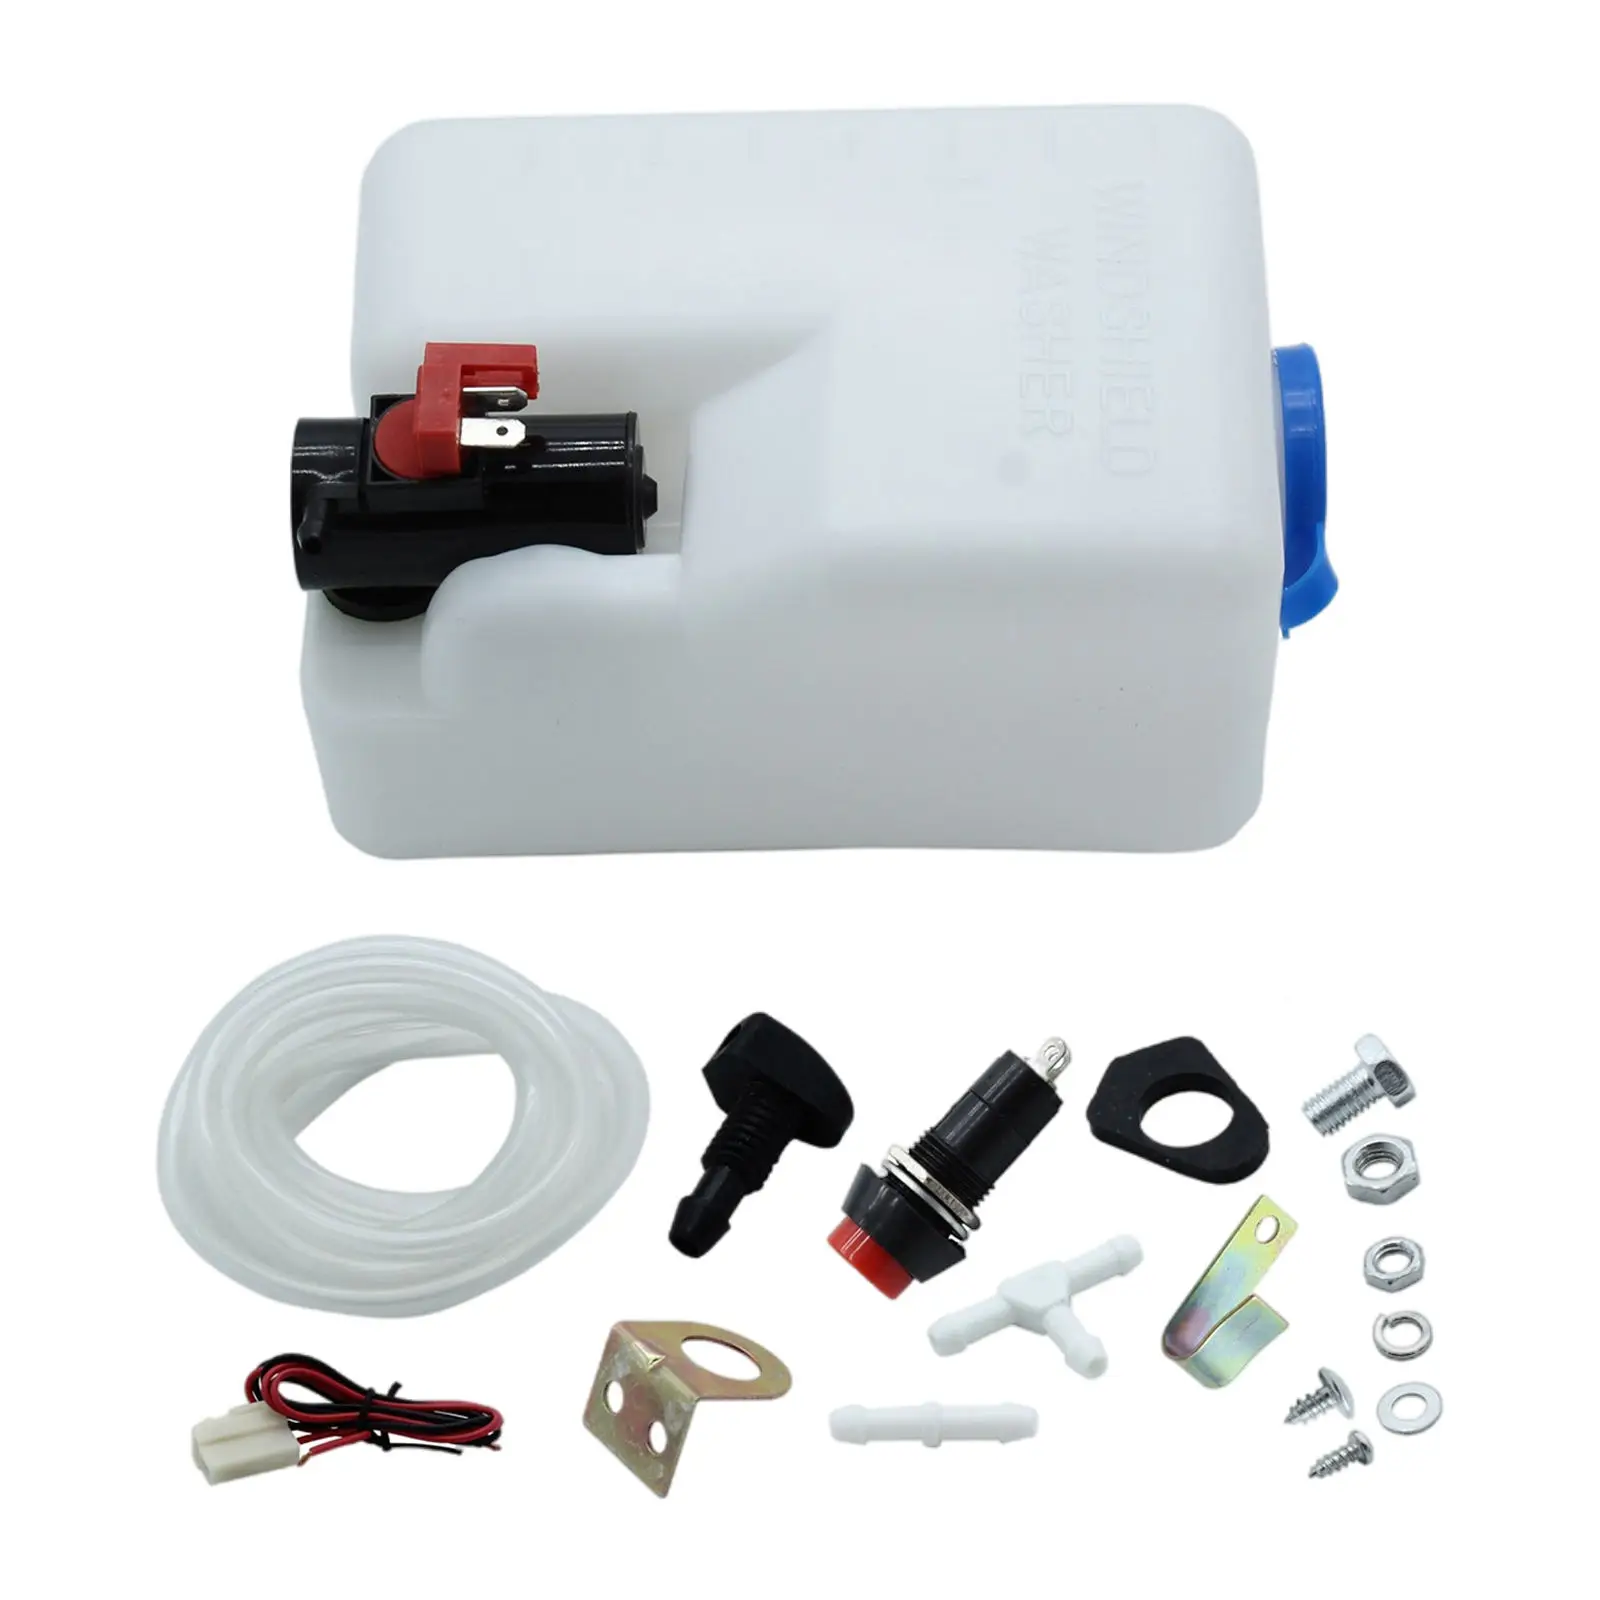 Windshield Washer Reservoir Button Sprayer Kit Clean Tank Fit for SUV Truck